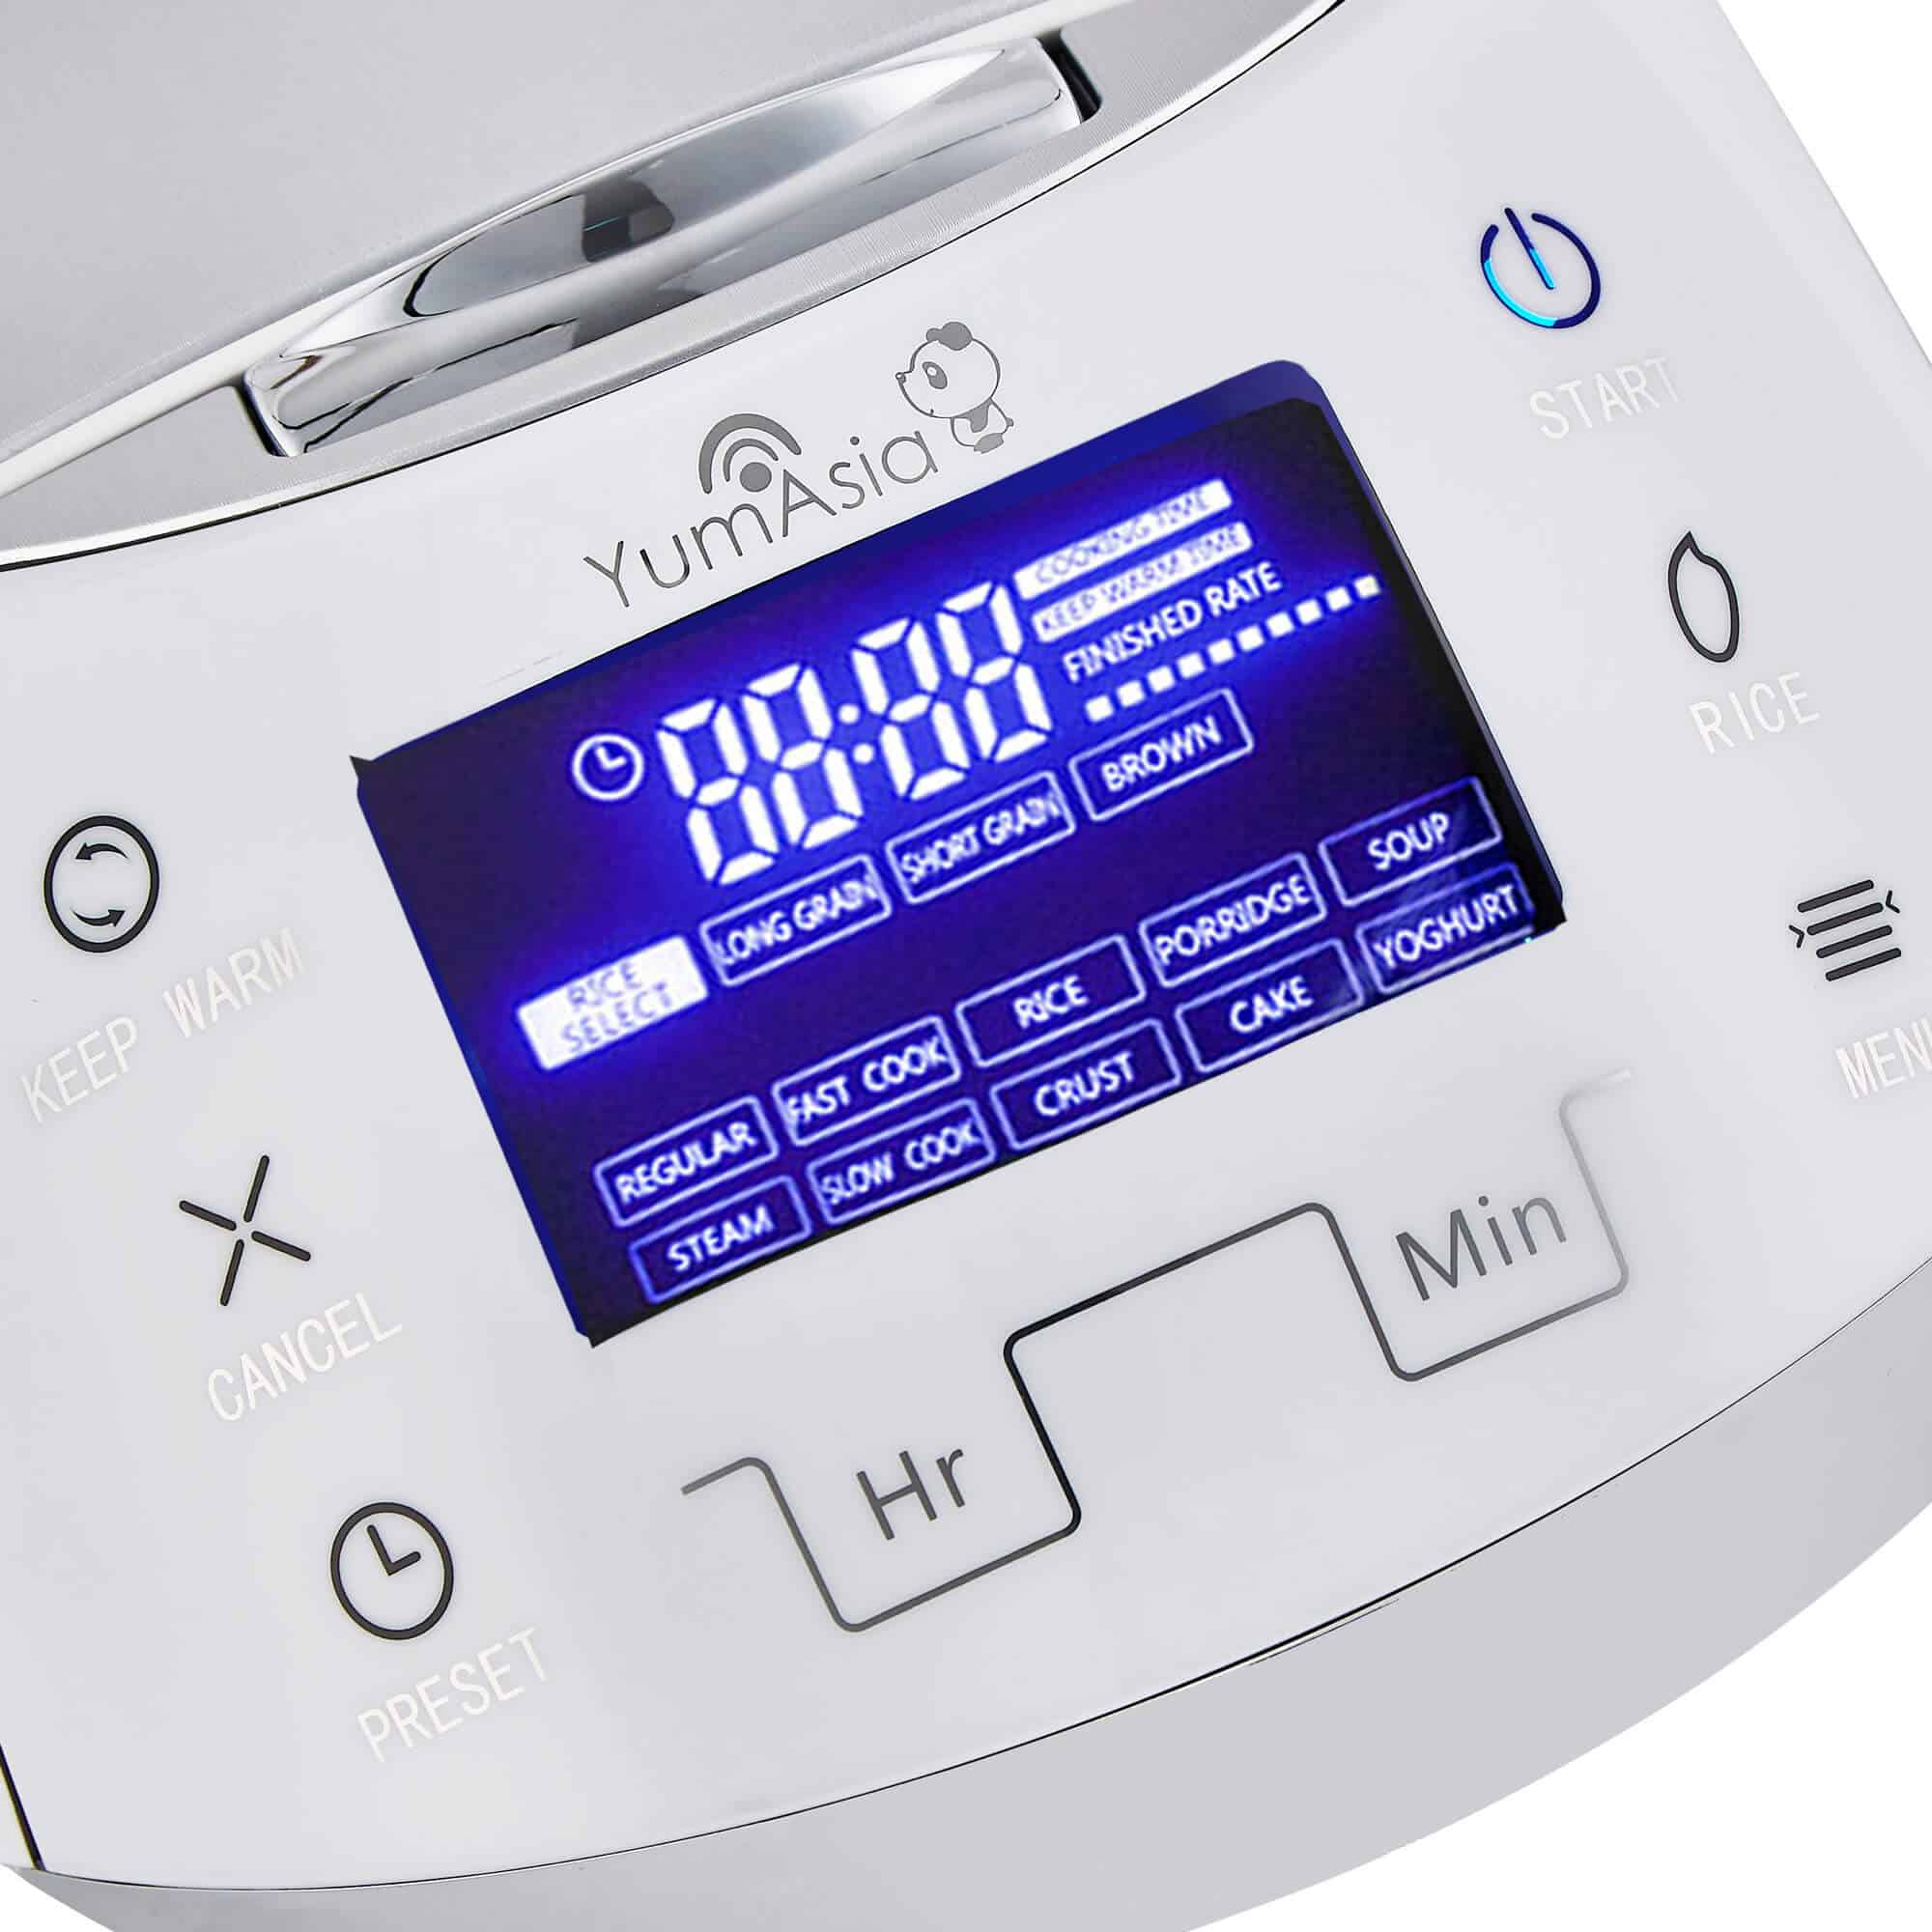 Yum Asia Sakura Rice Cooker with Ceramic Bowl and Advanced Fuzzy Logic (8 Cup, 1.5 Litre) 6 Rice Cook Functions, 6 Multicook Functions, Motouch LED